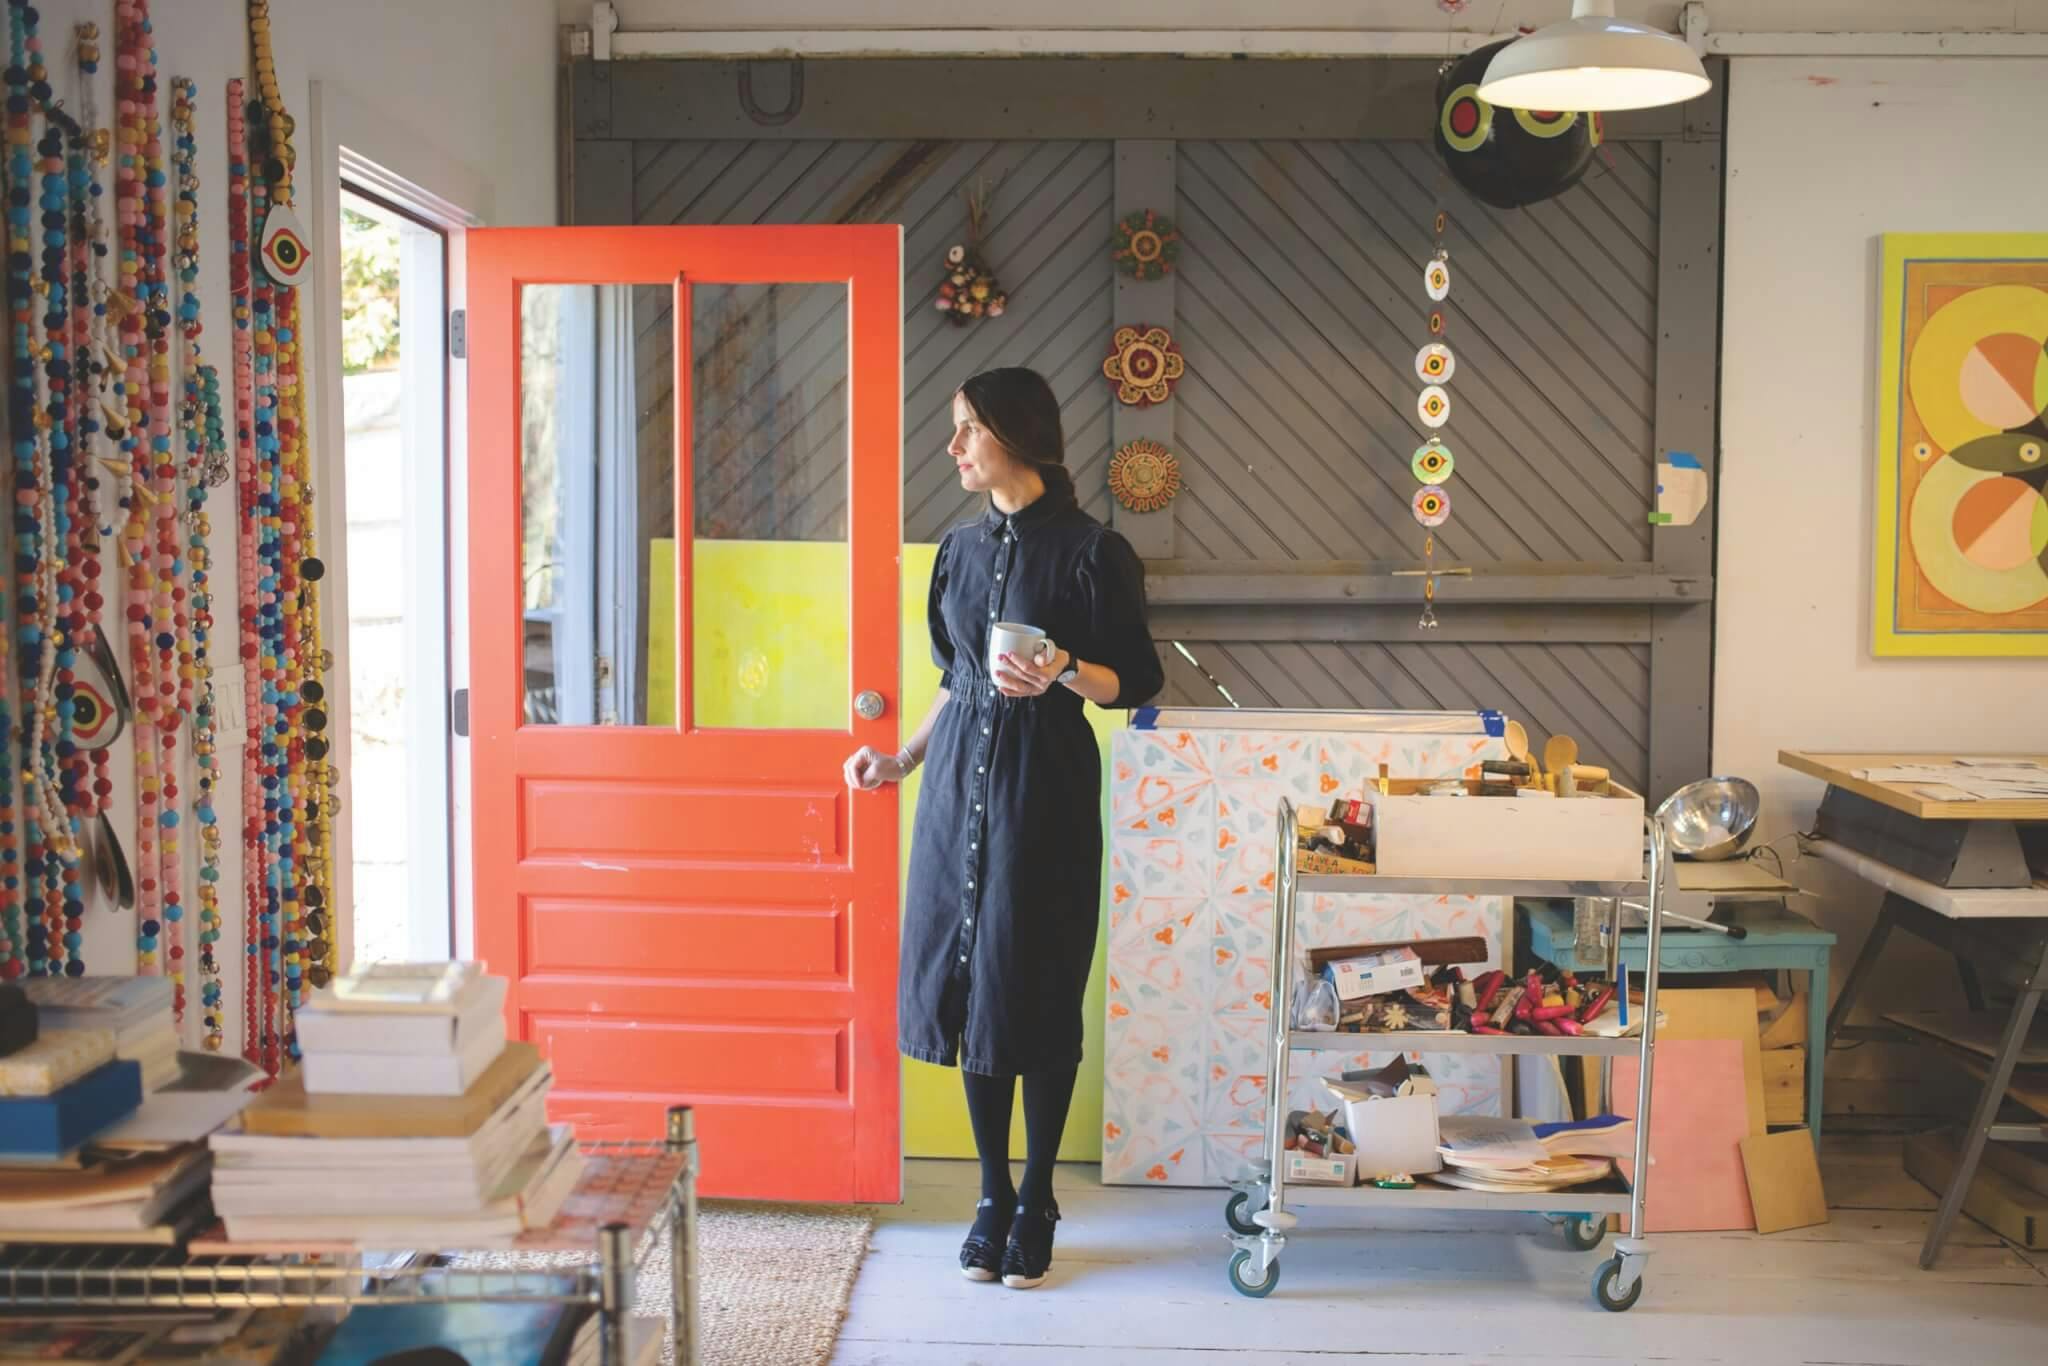 Artist Crystalle Lacouture stands beside a brightly colored door in her Wellesley studio, holding a mug.